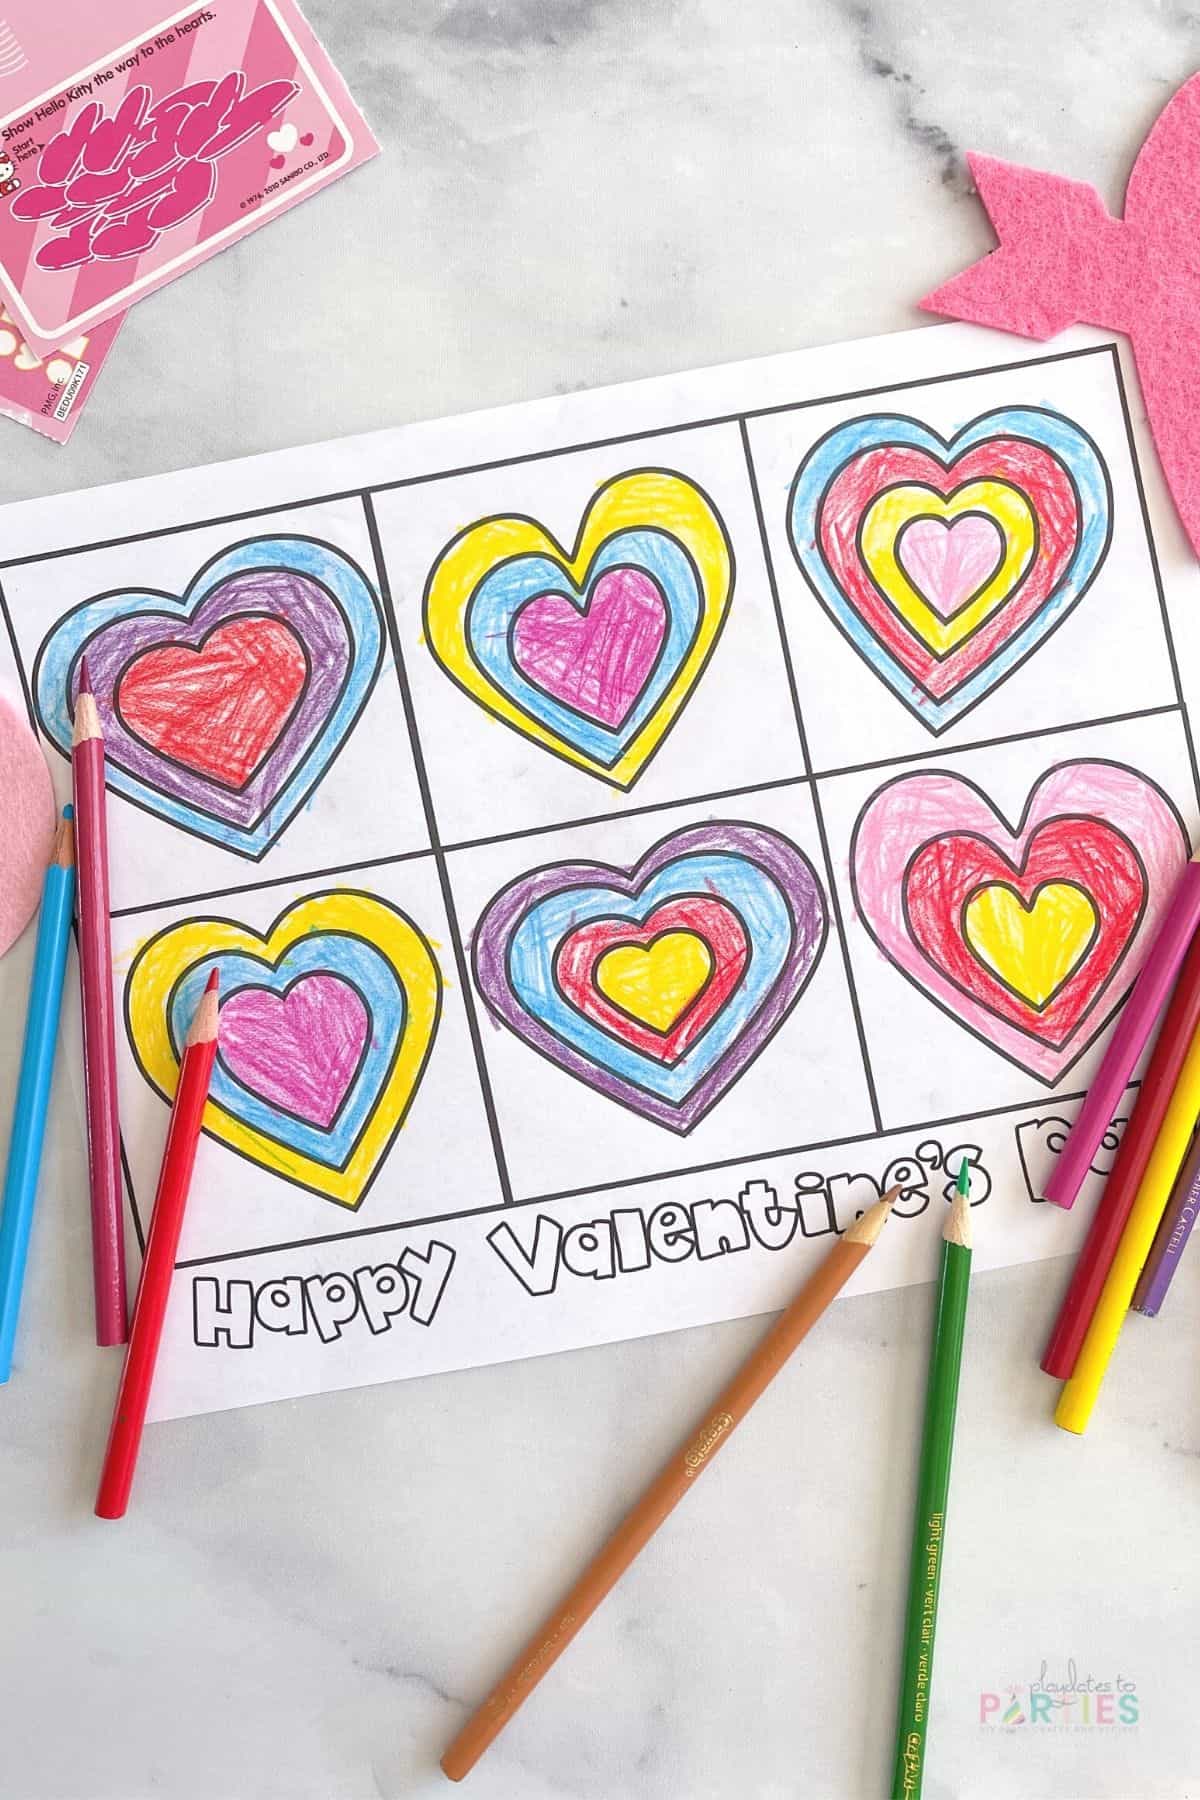 A free printable Valentine's Day coloring page with hearts surrounded by colored pencils.